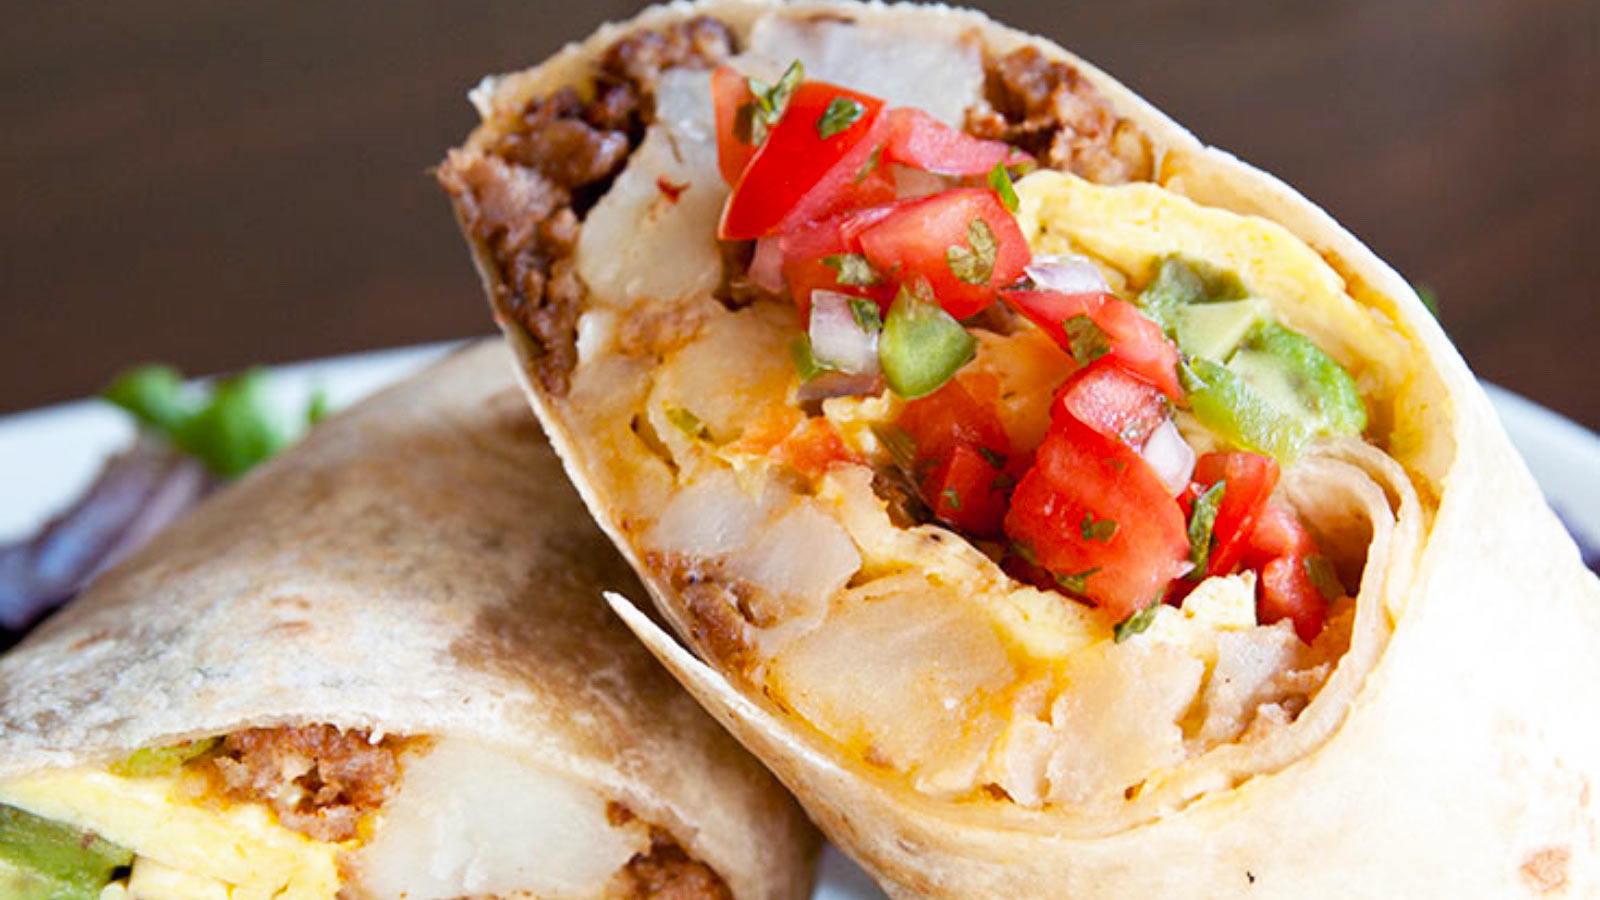 A cut breakfast burrito up close, showing all the fillings.